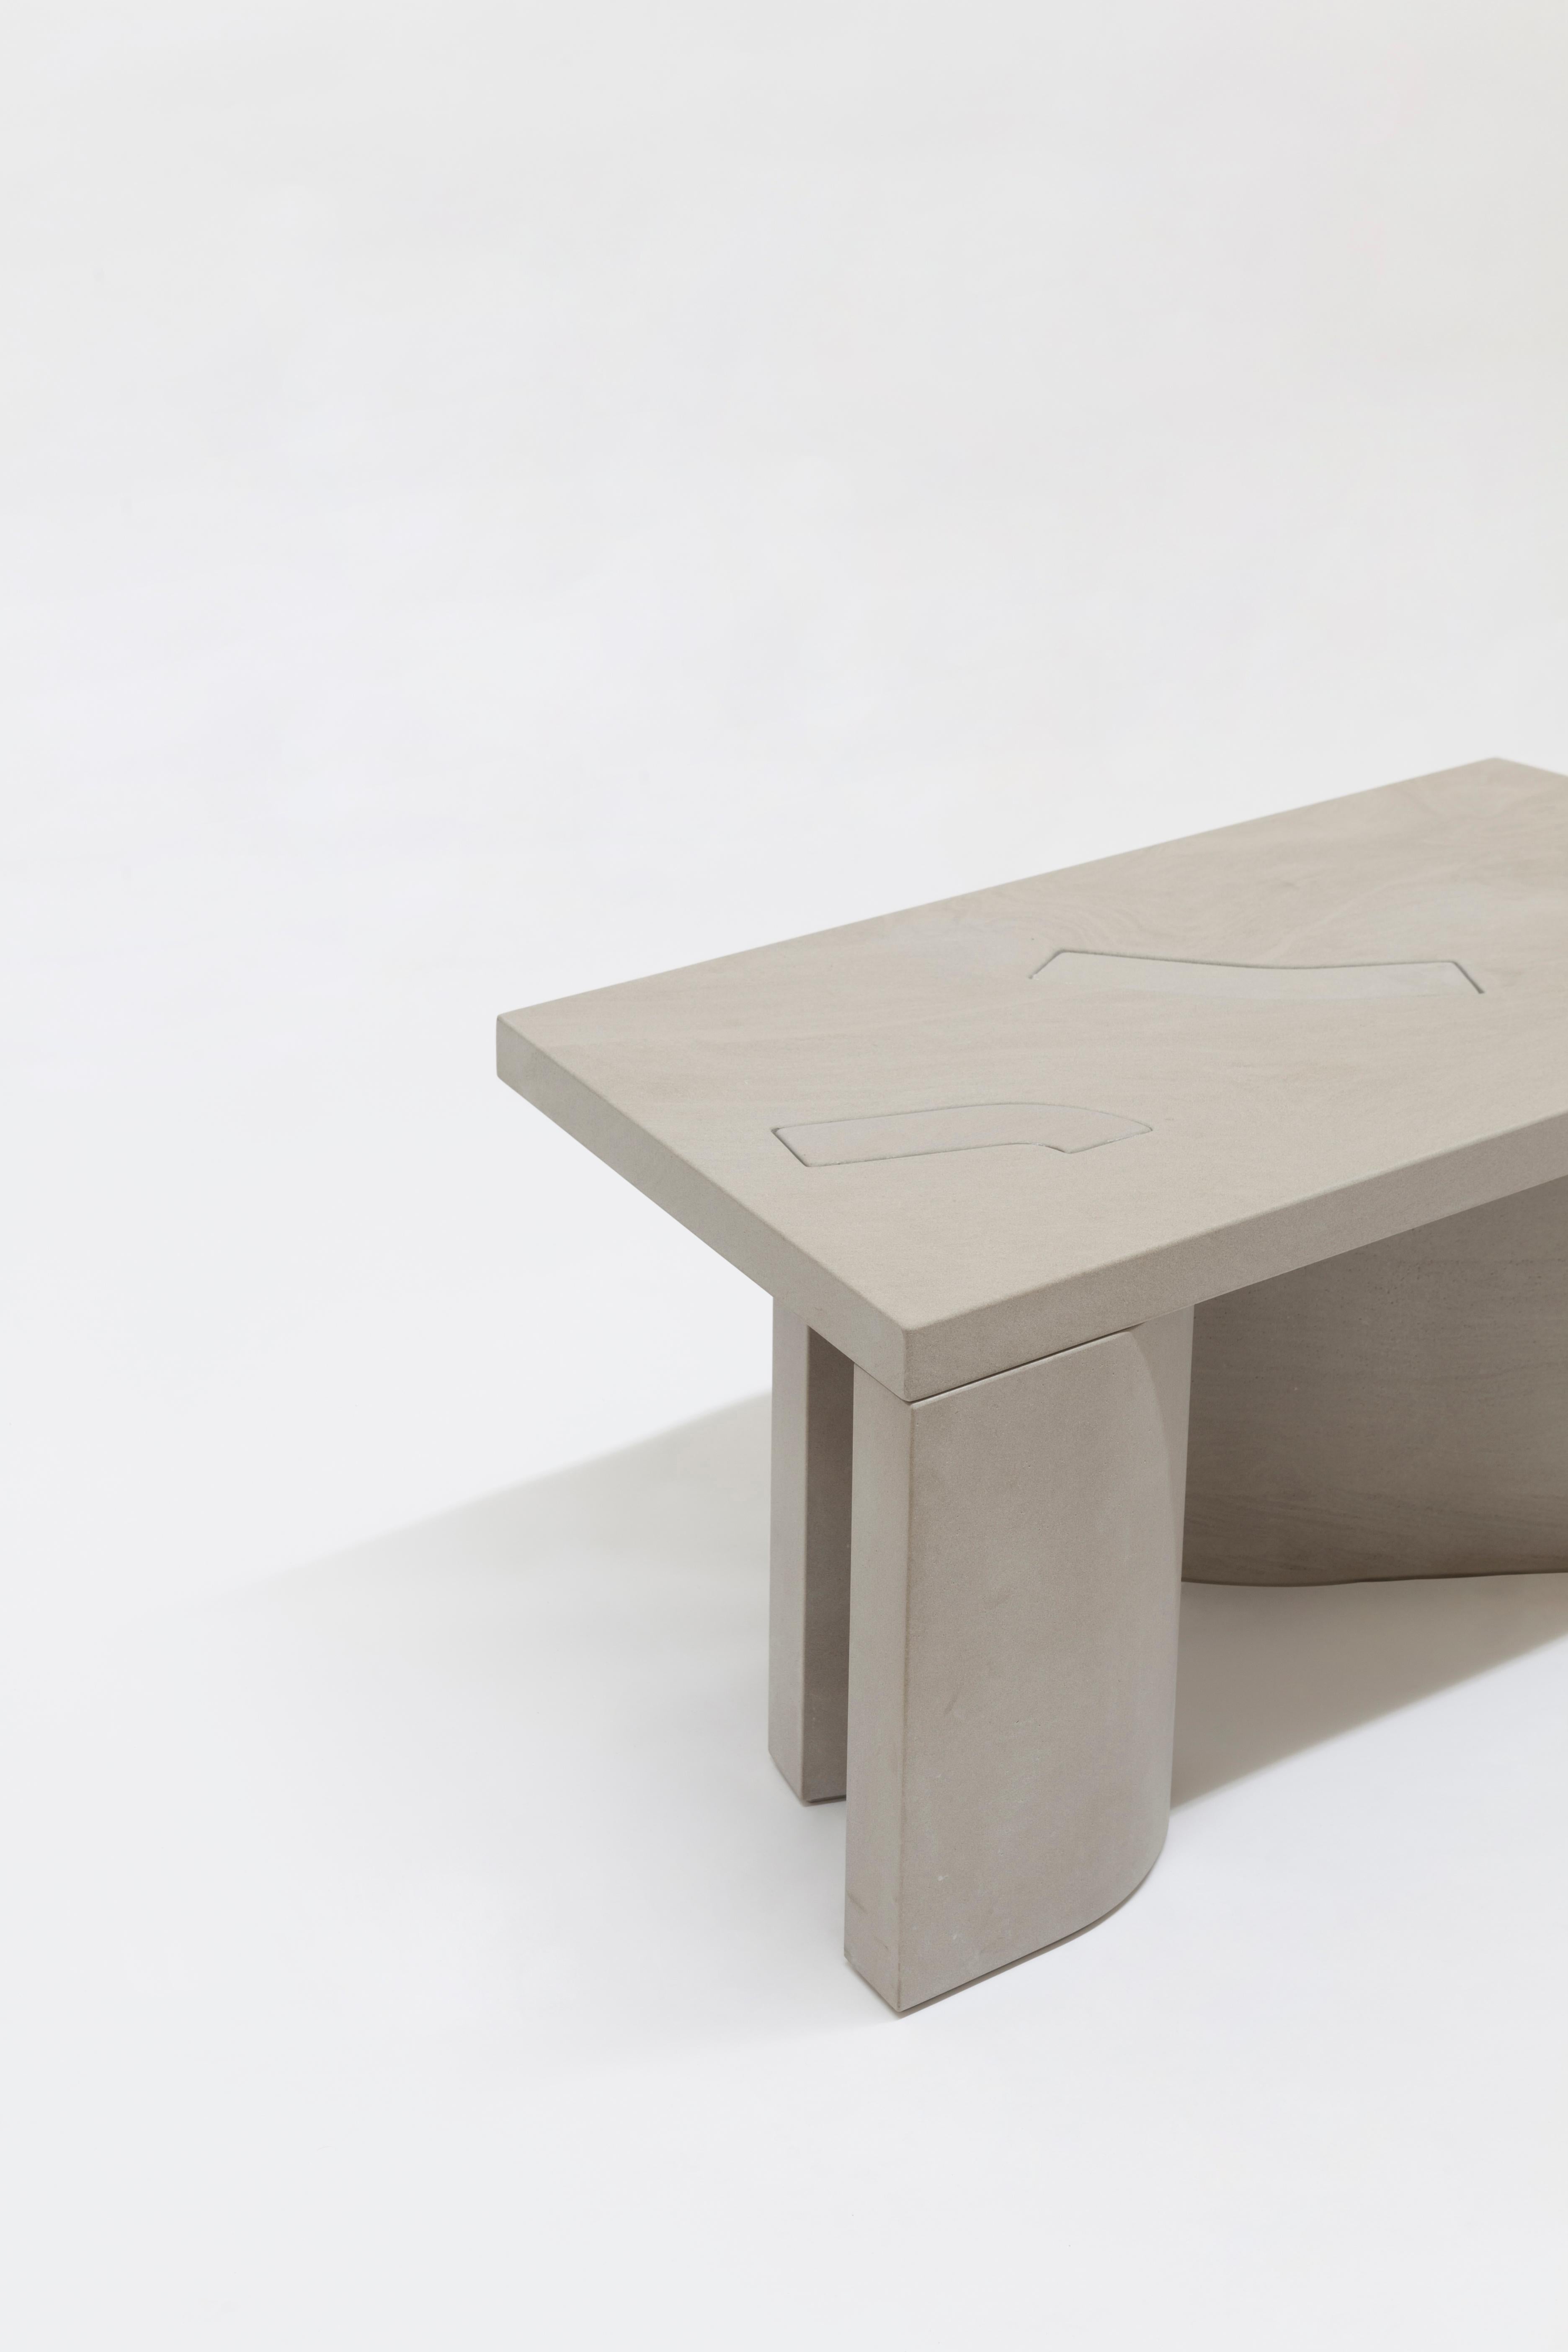 Unsighted Table 5 by Bahraini-Danish in Giallo Avorio Marble In New Condition For Sale In Pireaus-Athens, Greece